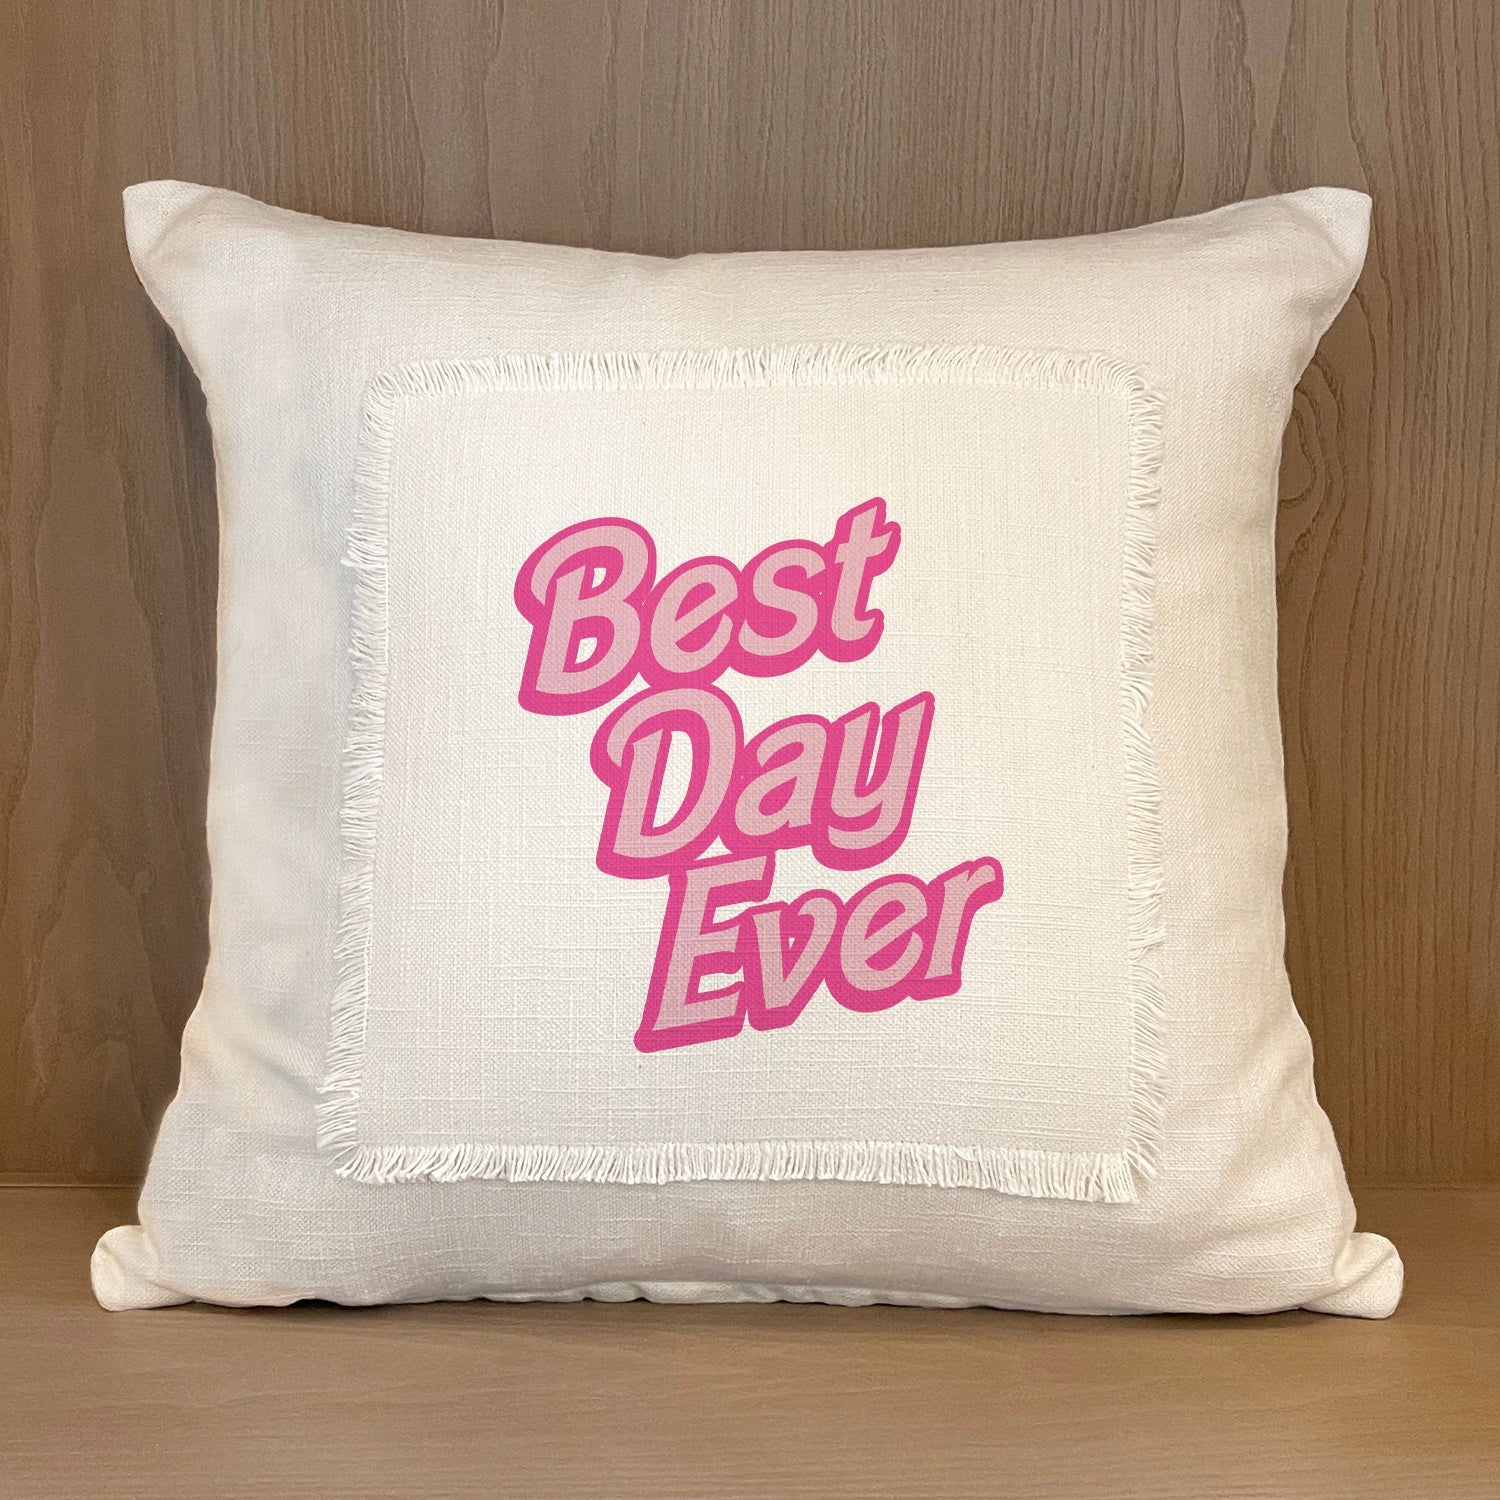 Best Day Ever / Trend MS Natural Pillow Cover